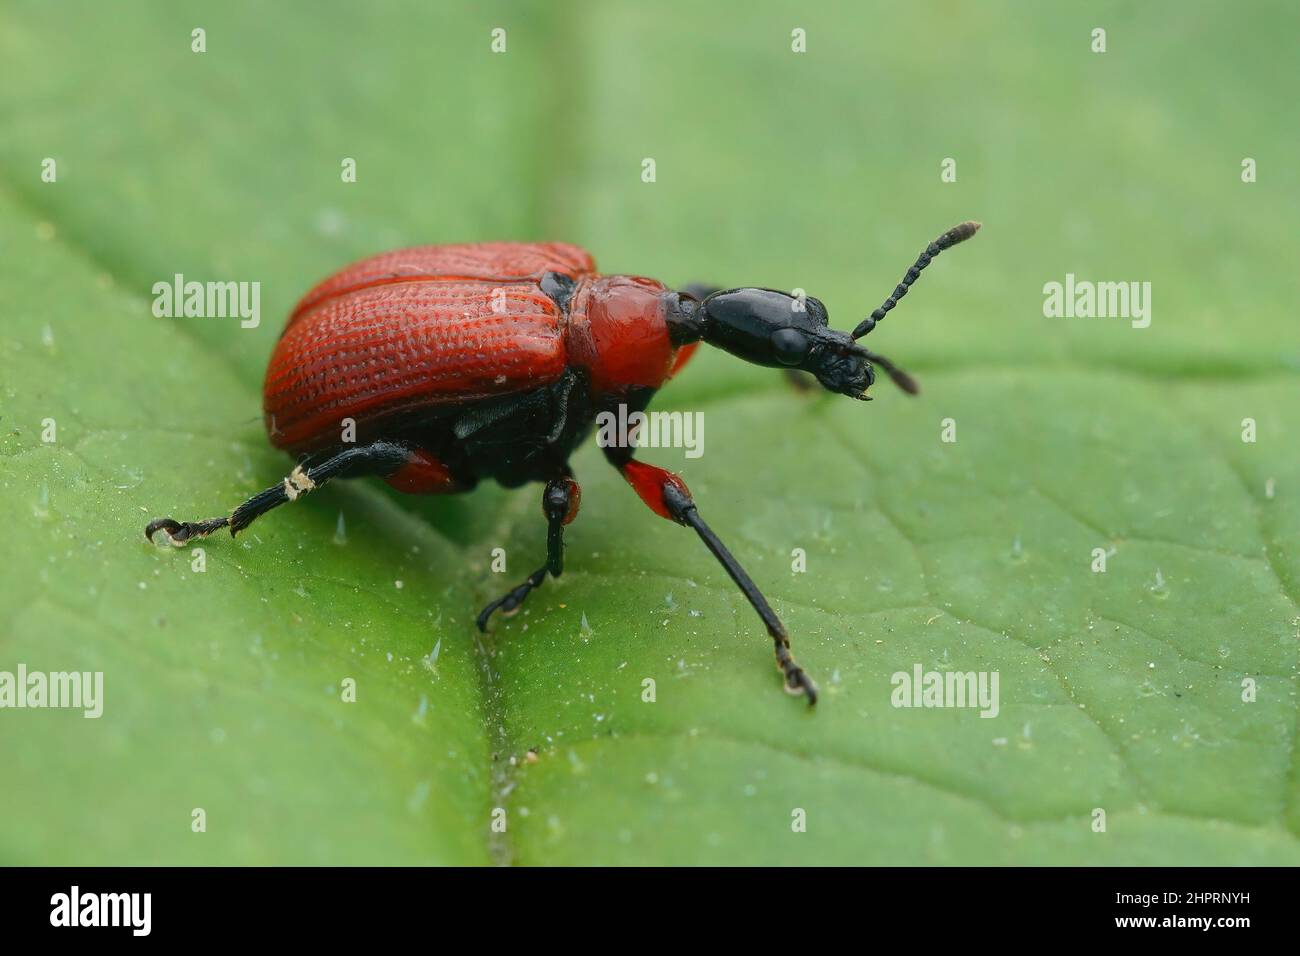 Closeup on a small red hazel-leaf roller weevil beetle, Apoderus coryli sitting on a green leaf Stock Photo